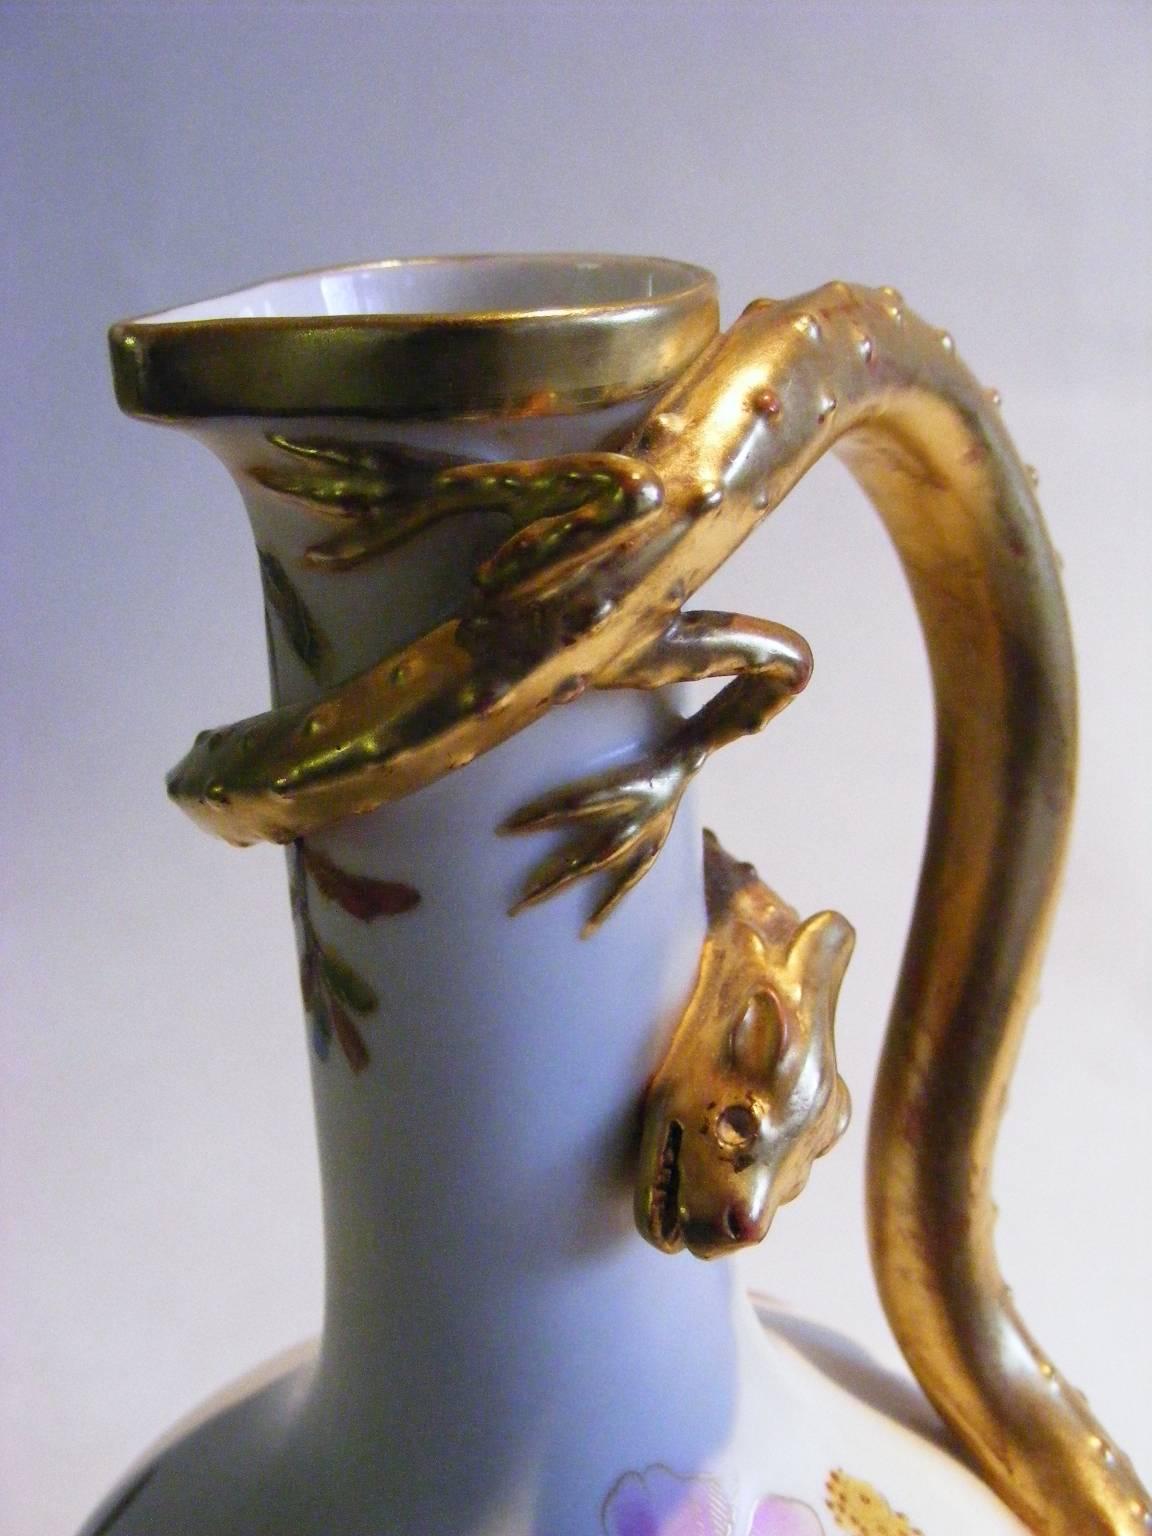 This is a fine example of a late Victorian ewer made by Royal Worcester. The style is that of the famous Royal Worcester 260 design and, most rarely, is in perfect condition. A very rare piece indeed because of its quality and condition.

The